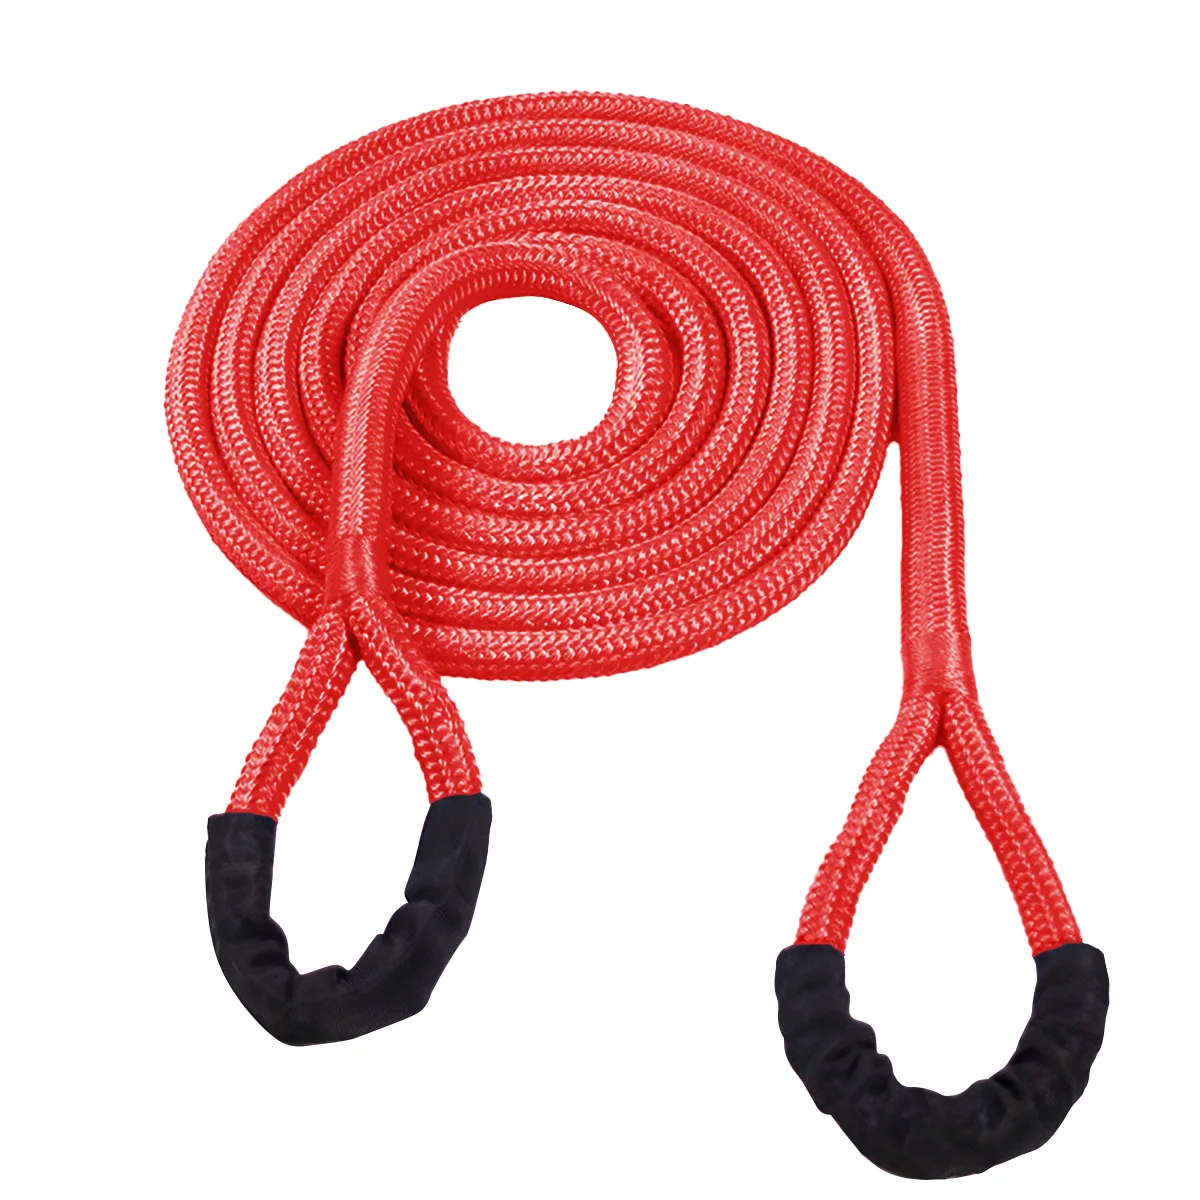 Off-road Auto Red Black Blue Color Nylon Recovery Kinetic Towing Rope 1 Inch  With 30ft Length - Tool Parts - AliExpress